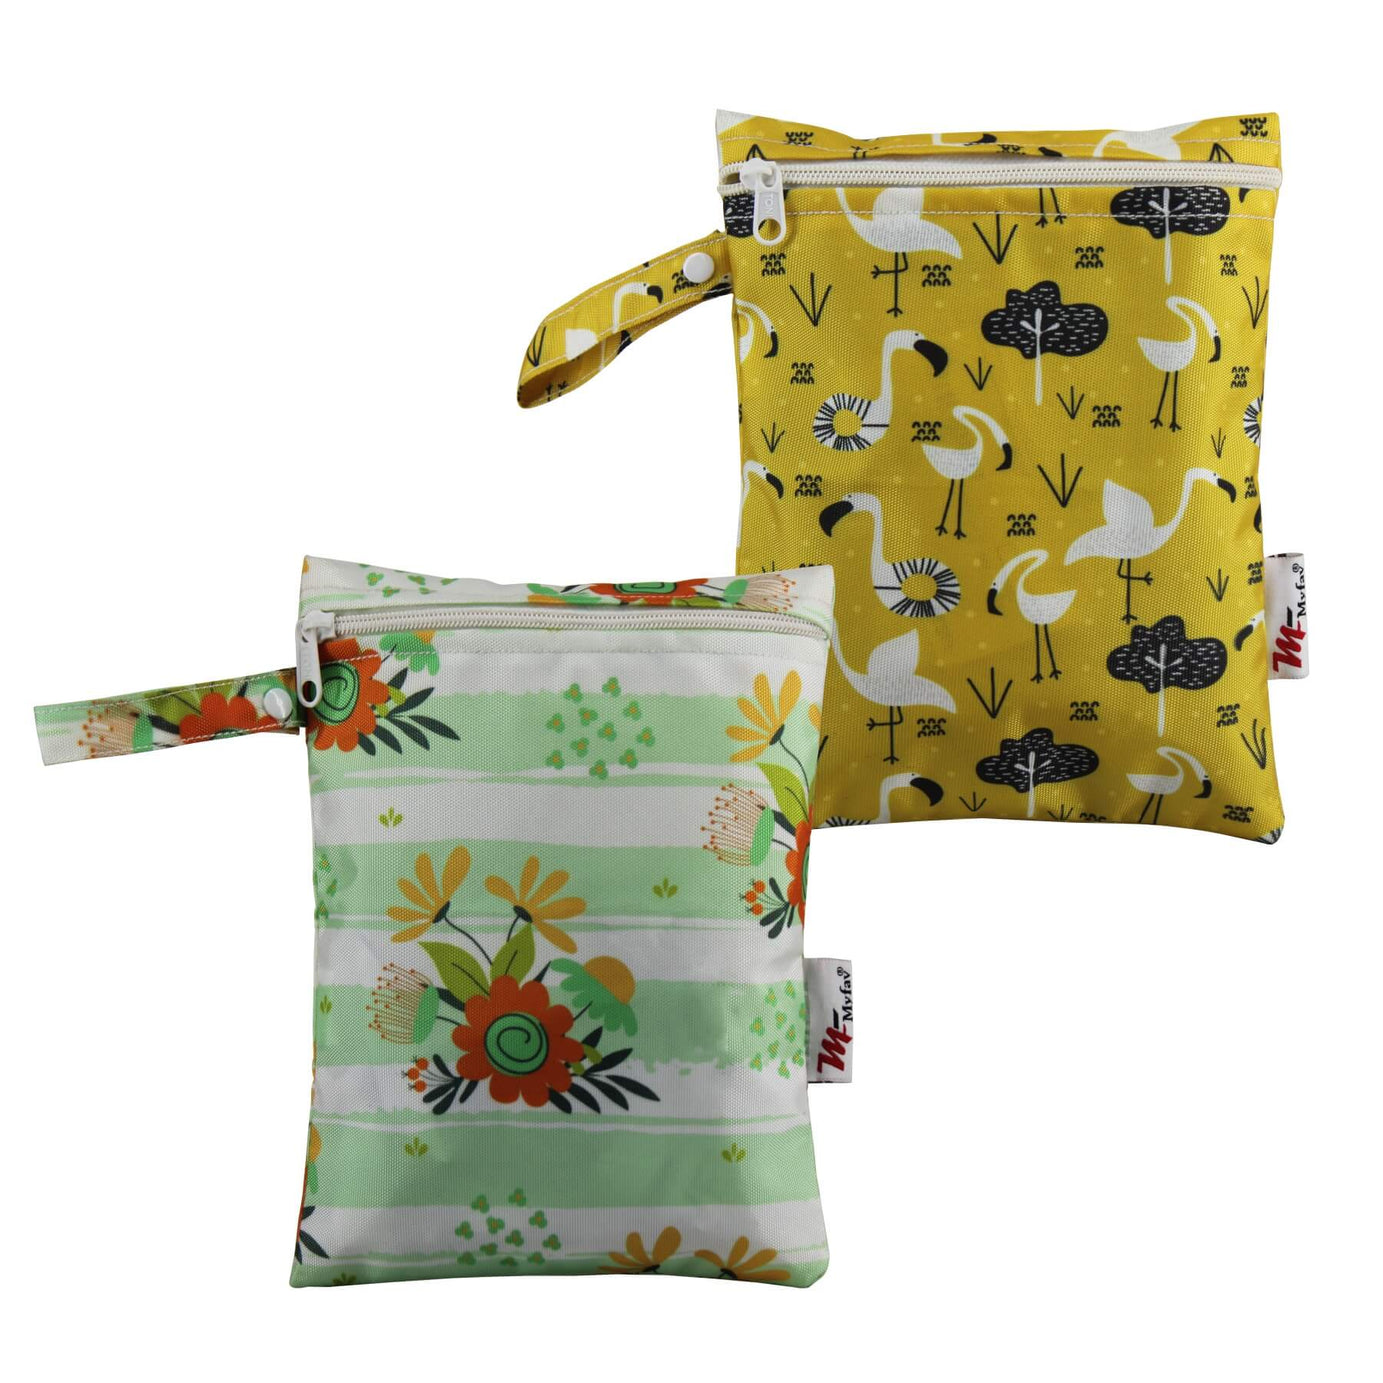 My Fav Spiral Print Multiutility Wet Dry Pouch/Diaper Bag/Travel Pouch/Travel Kit - Pack of 2